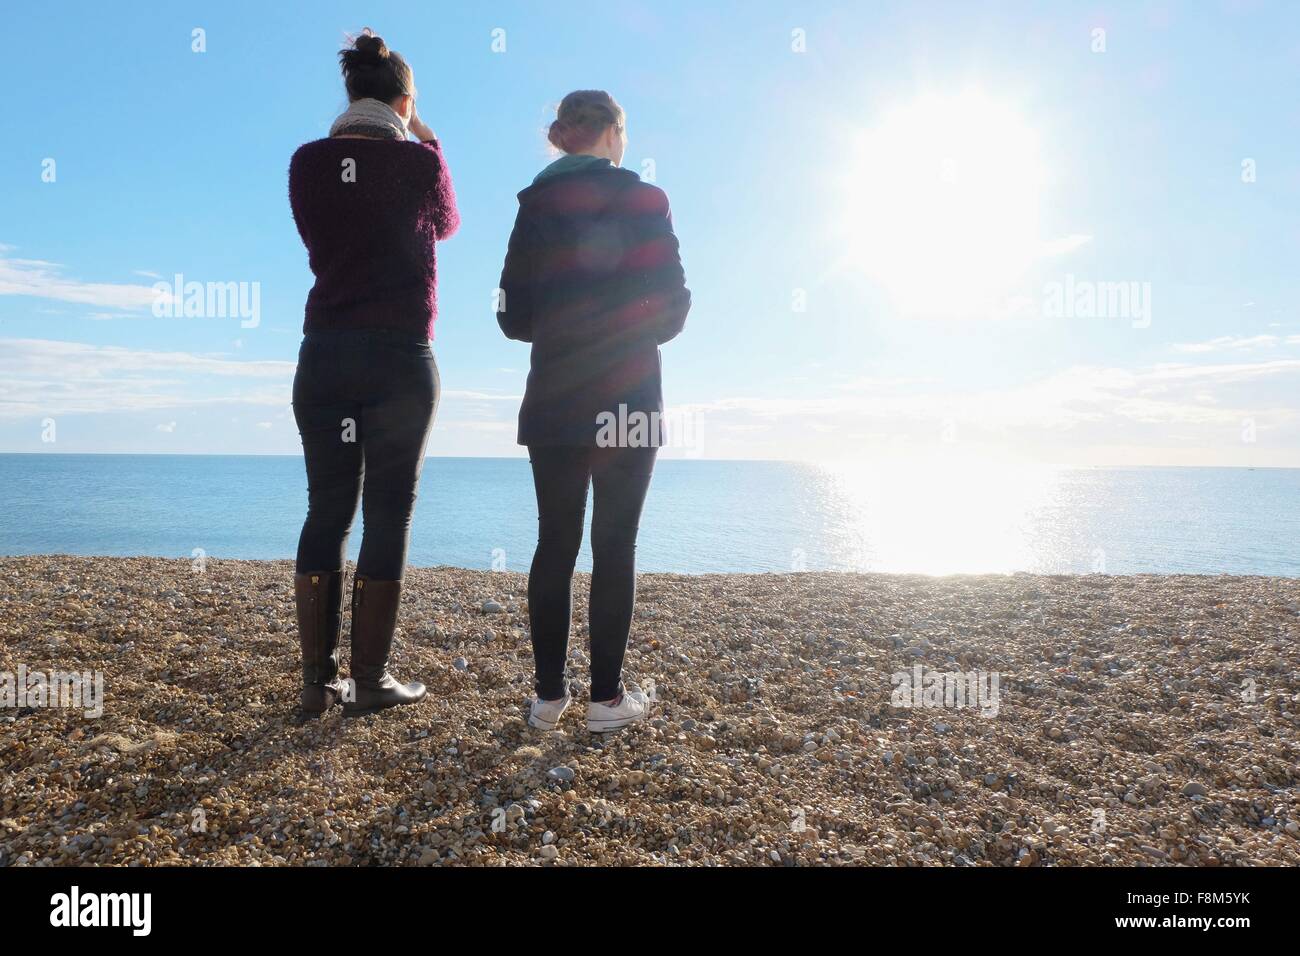 Rear view of two young adult sisters looking out at sunlit sea Stock Photo